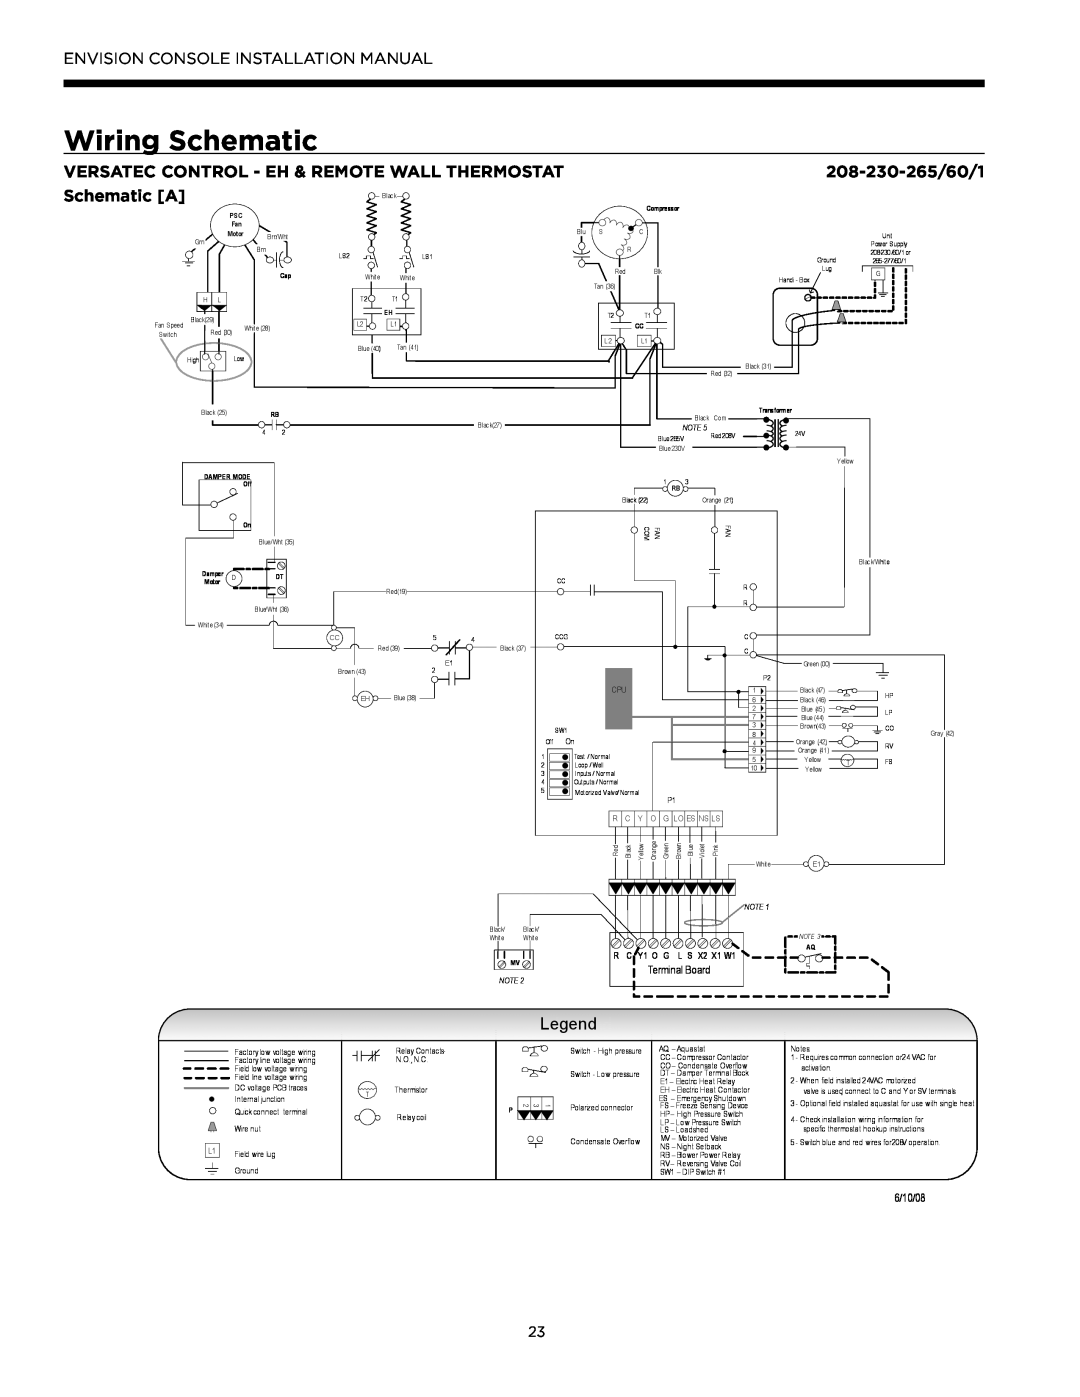 Envision Peripherals IM1609 08 Versatec Control - Eh & Remote Wall Thermostat, Schematic A, Wiring Schematic, PSC Fan 